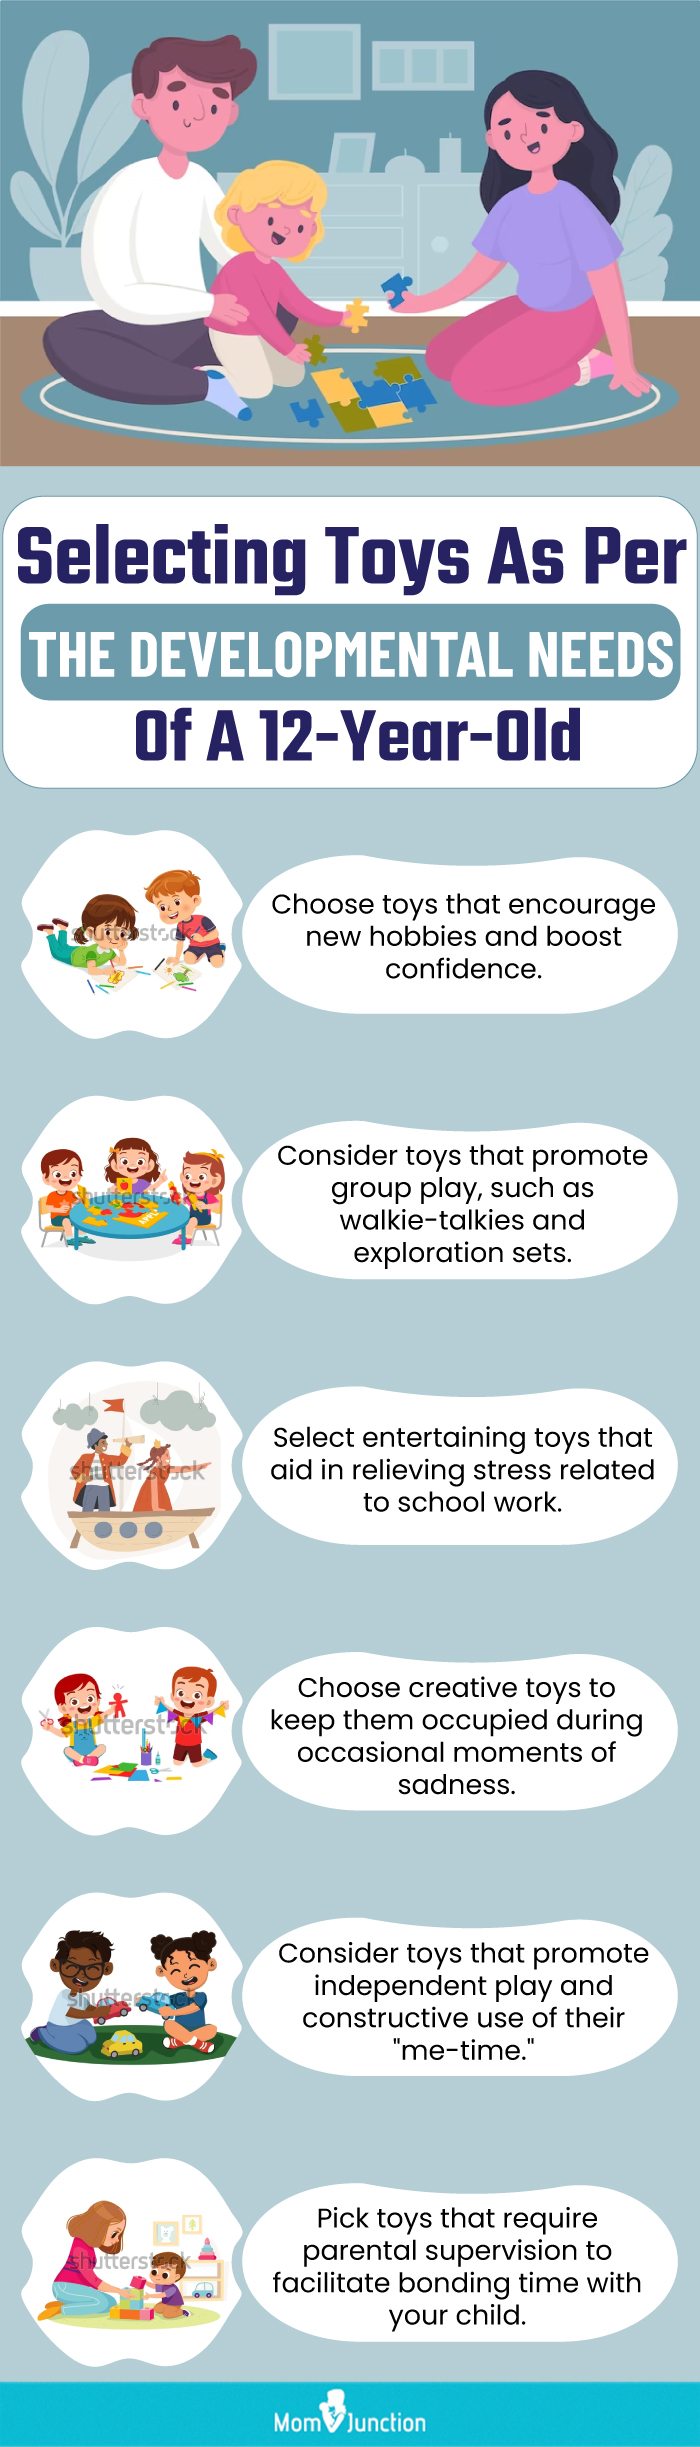 Selecting Toys As Per The Developmental Needs Of A 12 Year Old (infographic)